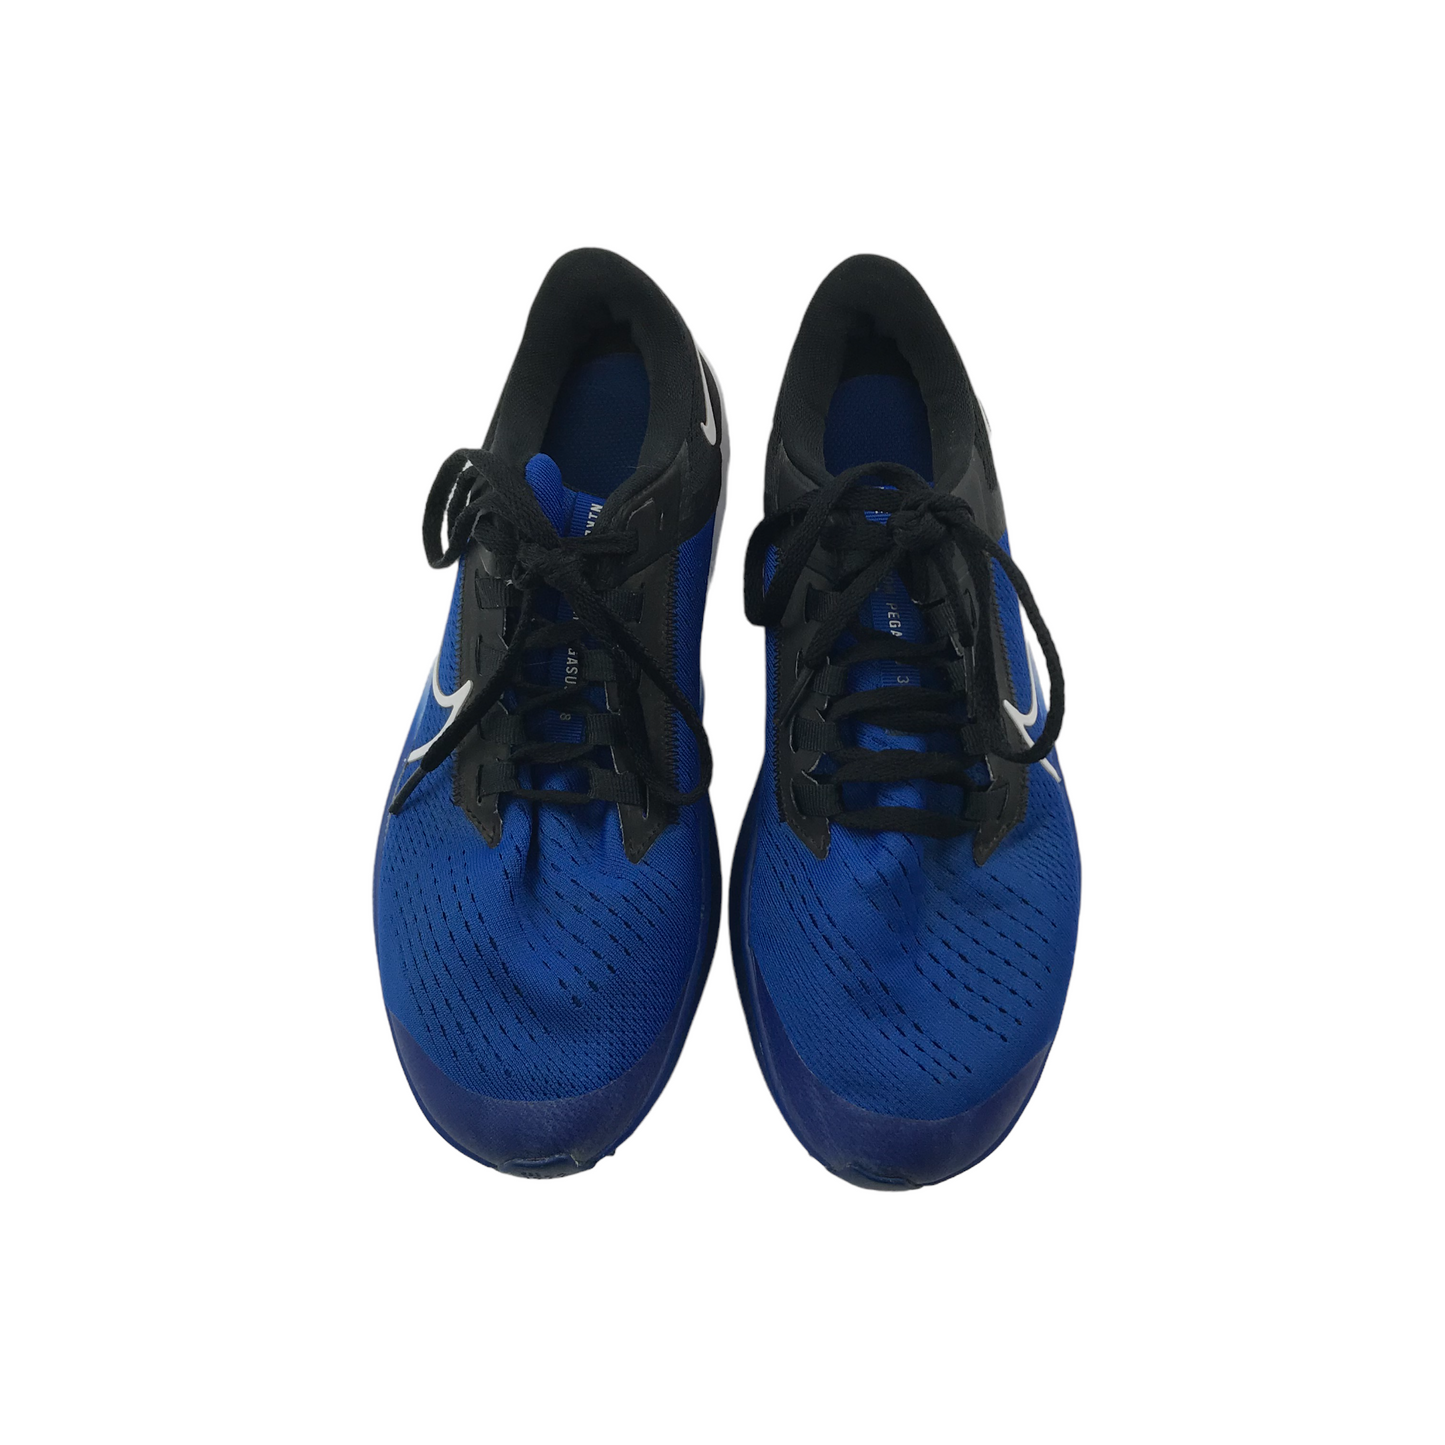 Nike Royal Blue Running Trainers Shoe Size 5.5